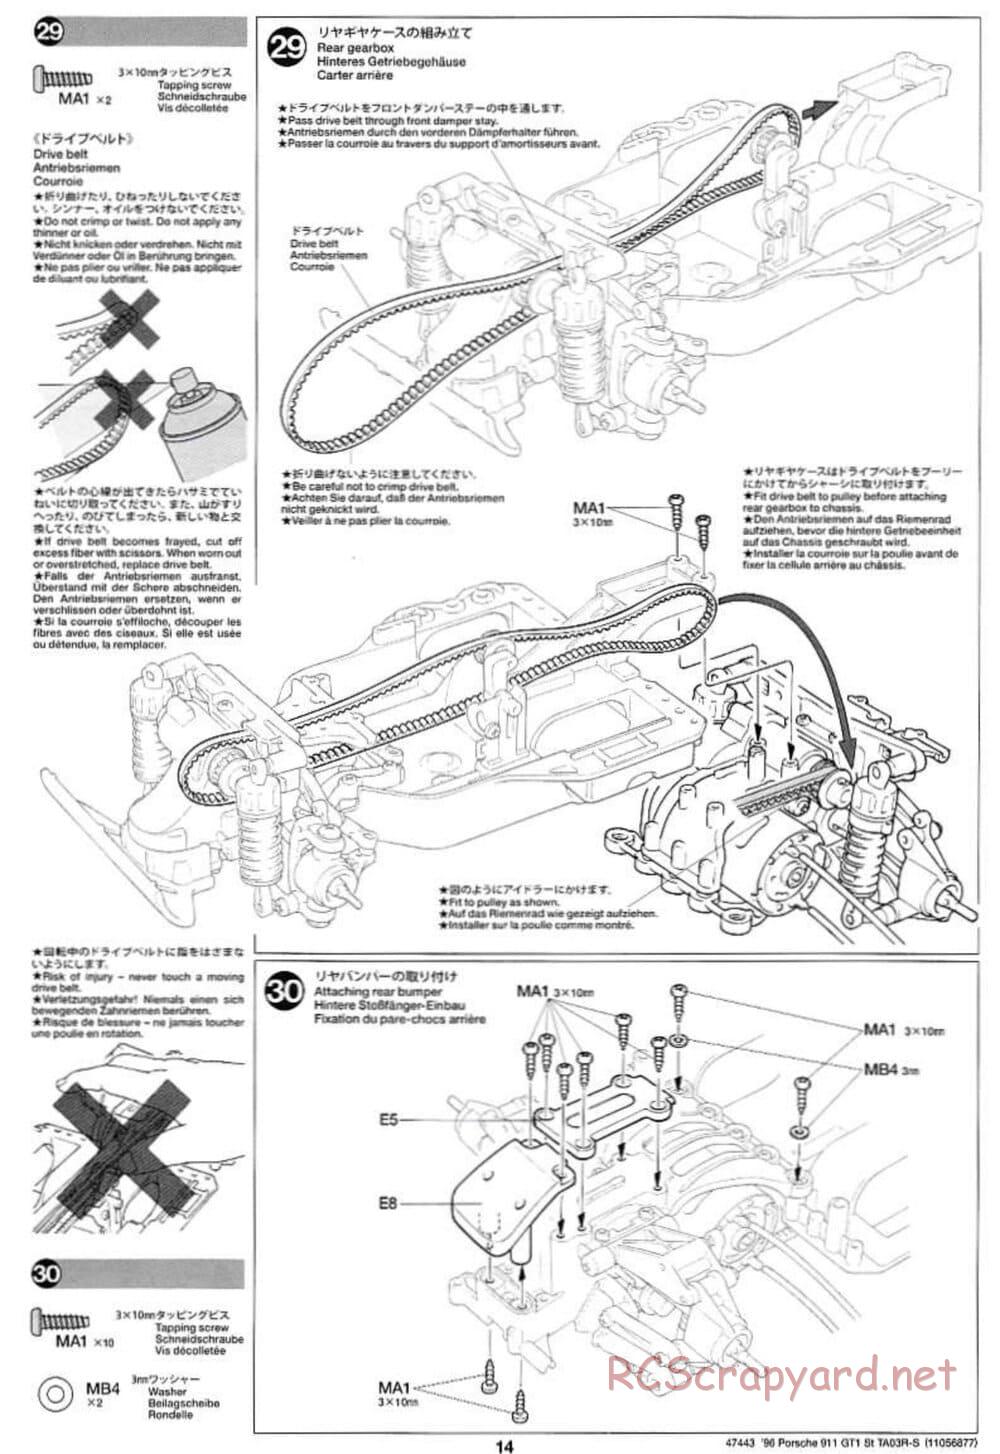 Tamiya - Porsche 911 GT1 Street - TA-03RS Chassis - Manual - Page 14